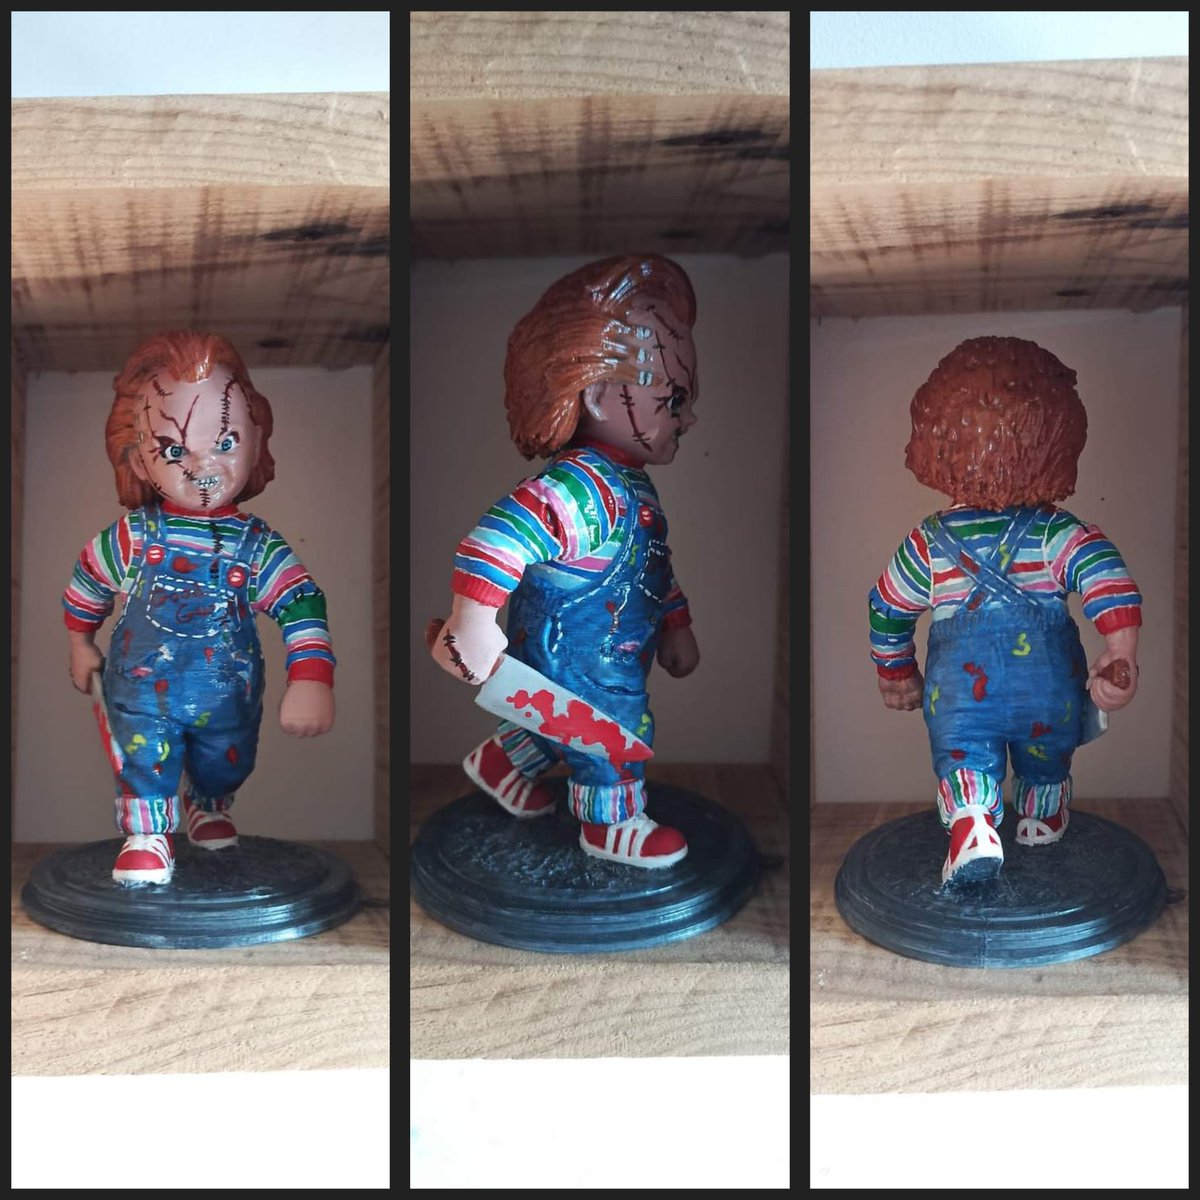 @Elegoo_Official I have already printed a figurine of Chucky from the movie of the same name. Thank @Elegoo_Official